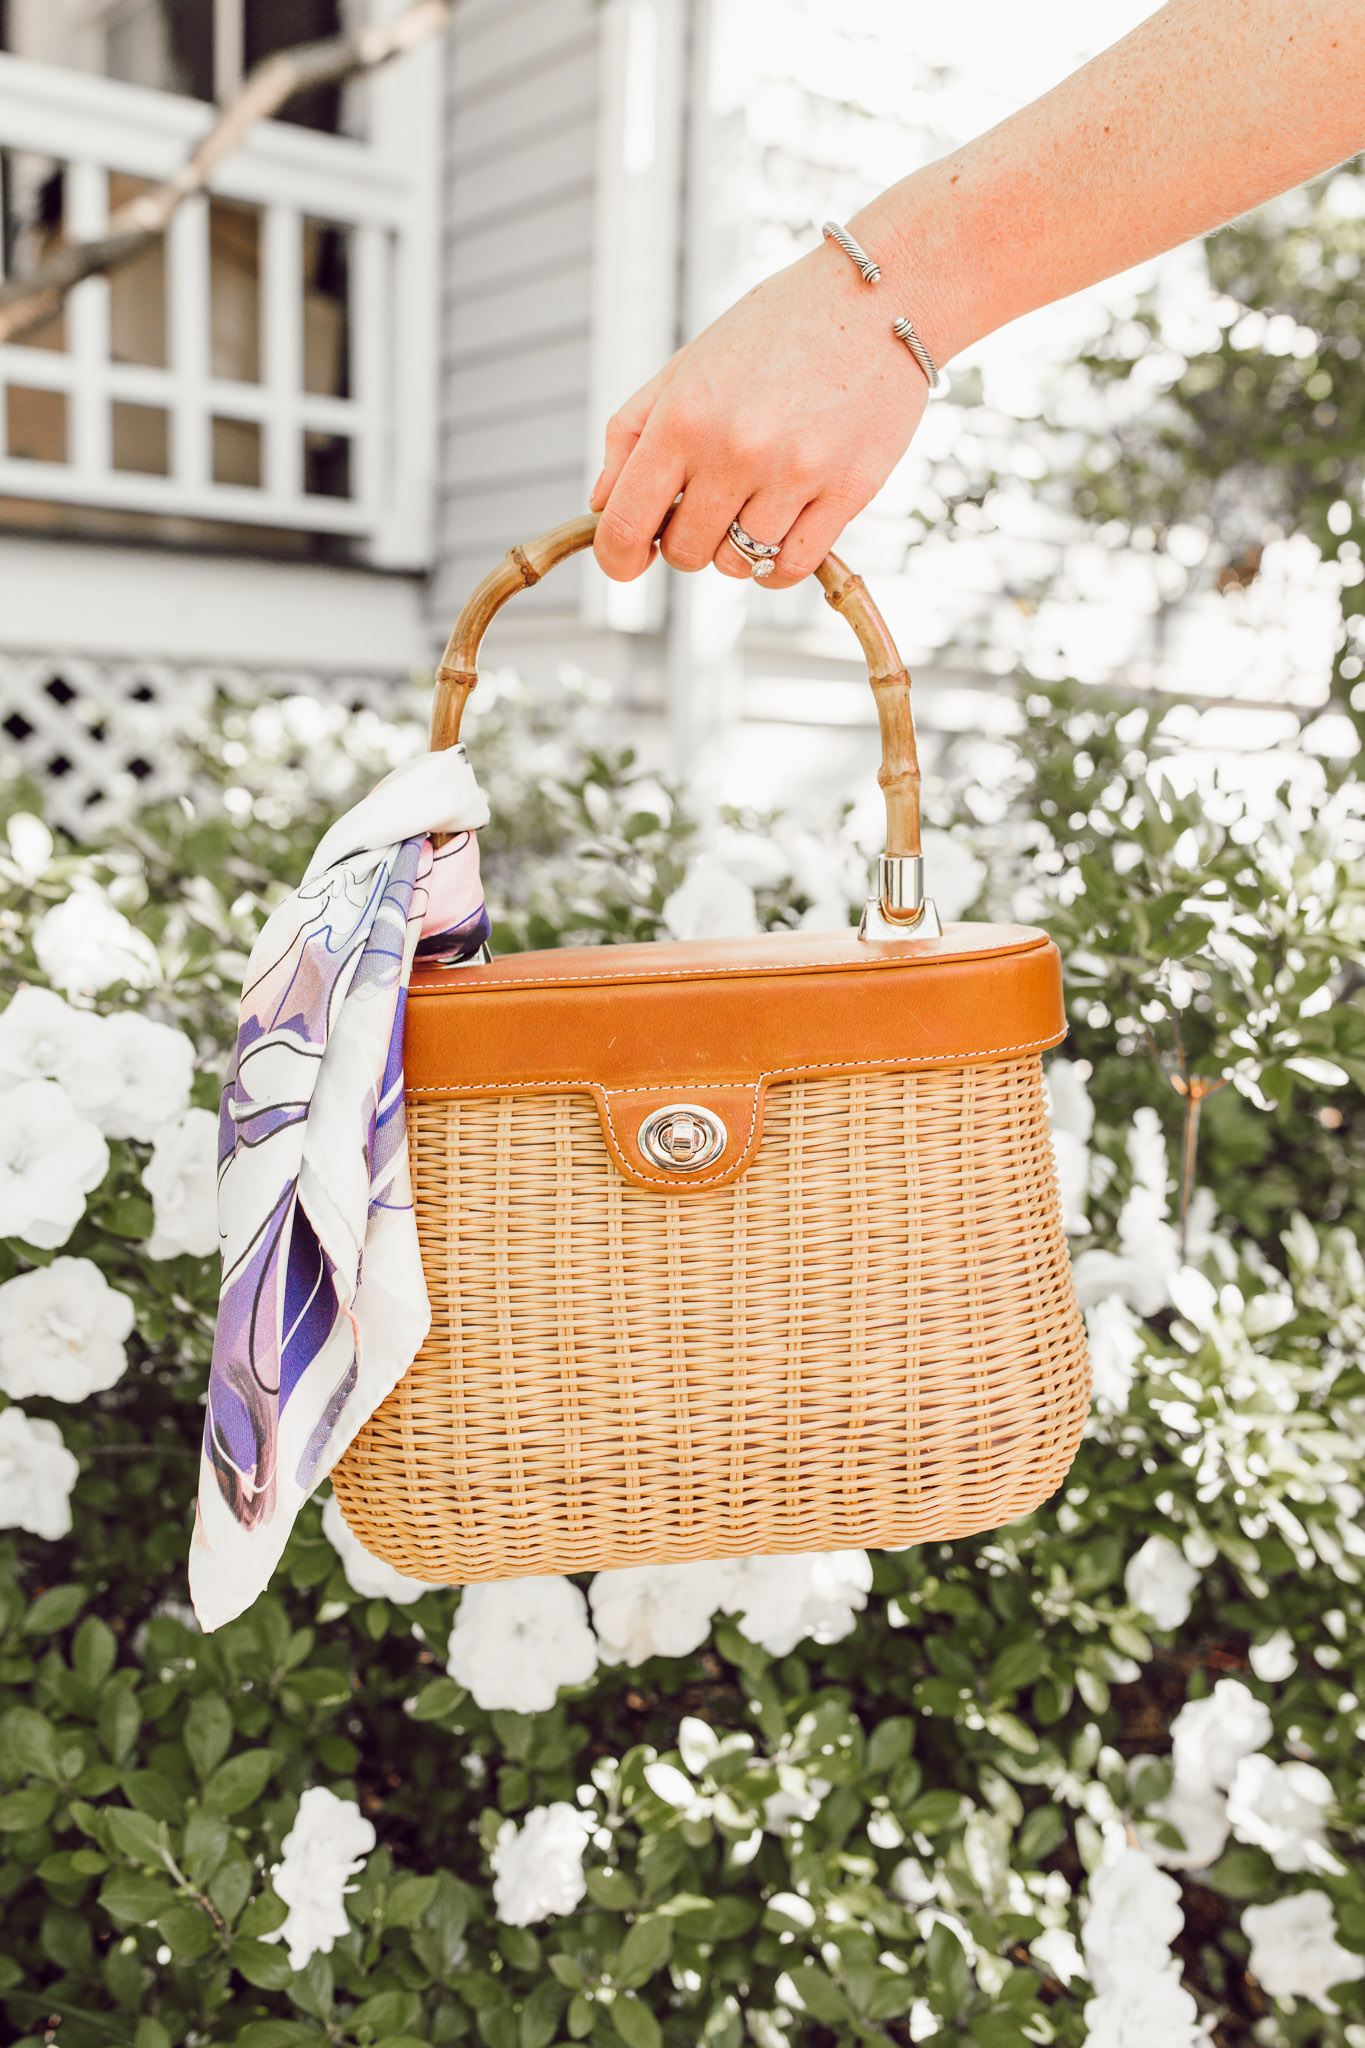 Wicker Handbags for Spring and Summer 2019 | Louella Reese